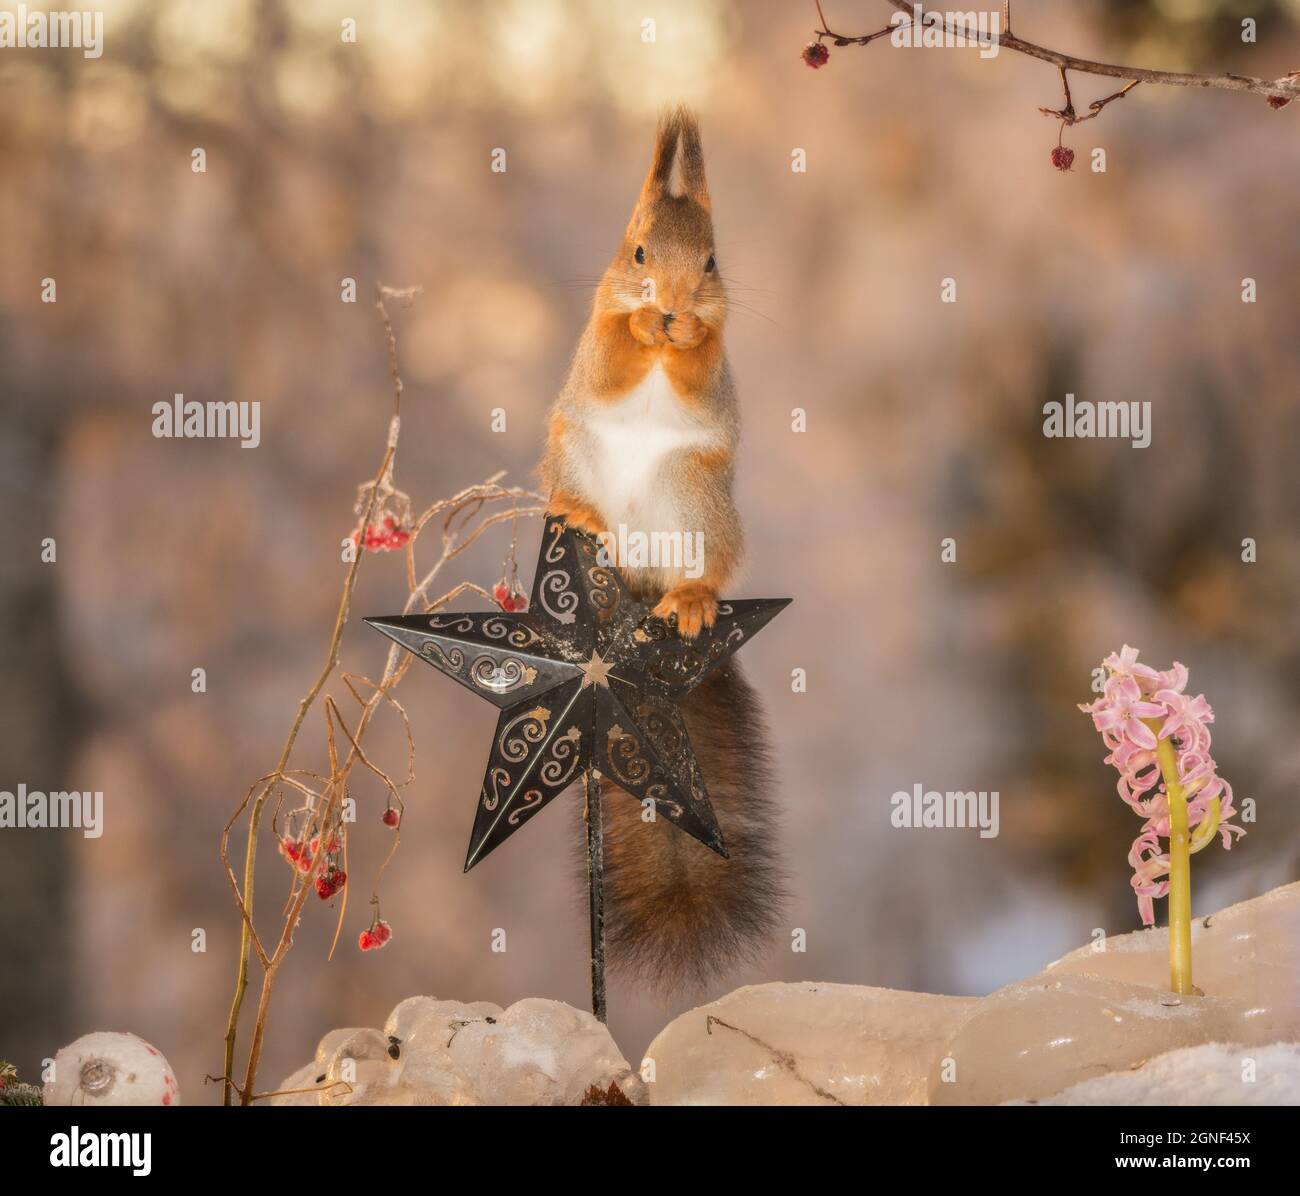 red squirrel standing on  a star with branches and berries surrounded Stock Photo